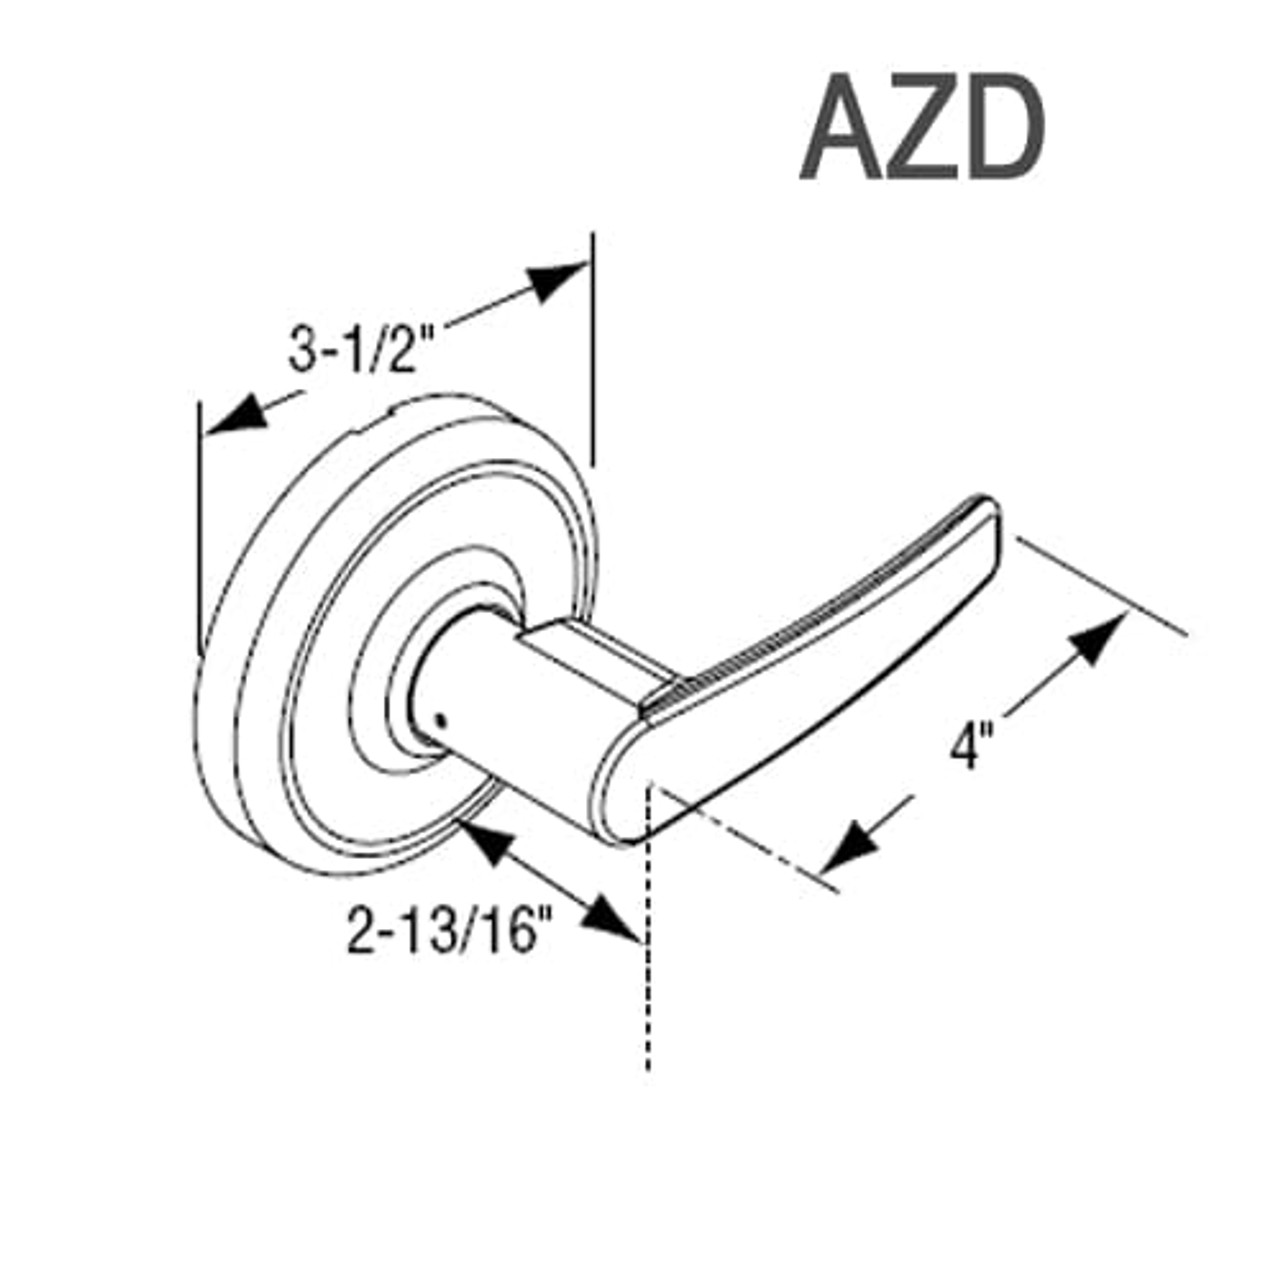 CL3861-AZD-612-LC Corbin CL3800 Series Standard-Duty Less Cylinder Office Cylindrical Locksets with Armstrong Lever in Satin Bronze